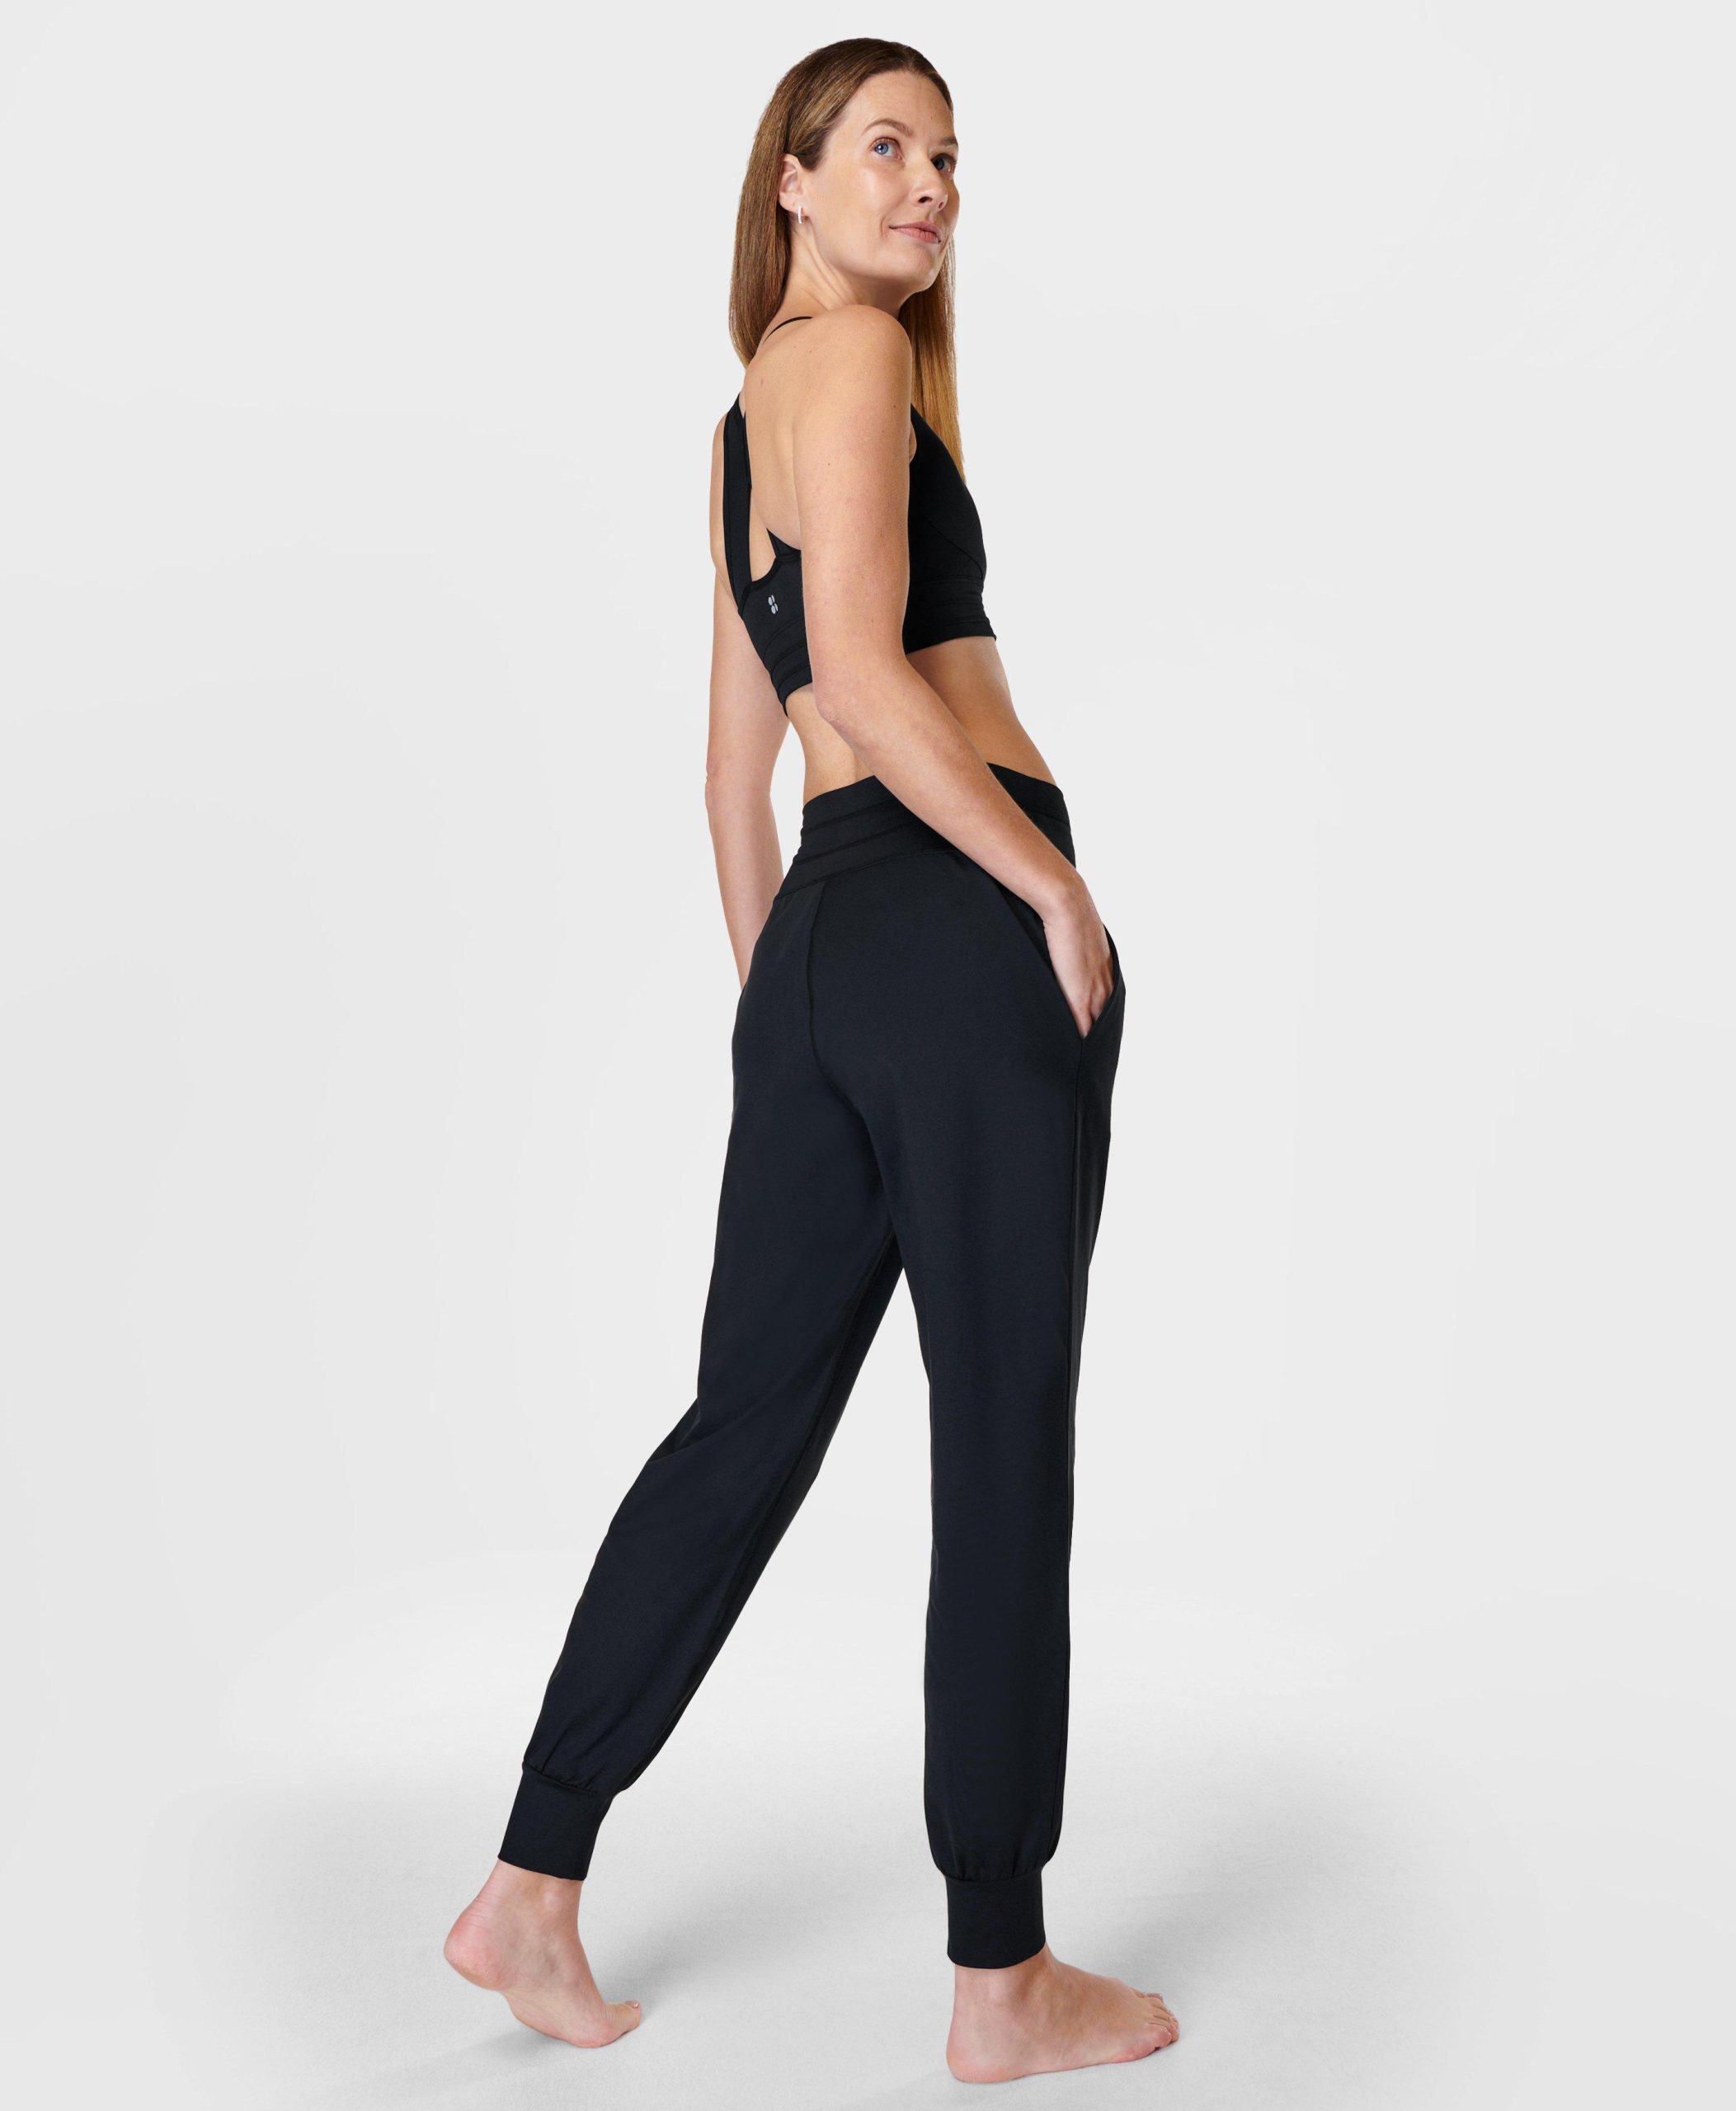 Exercise pants for women: Embracing Comfort and Style插图4